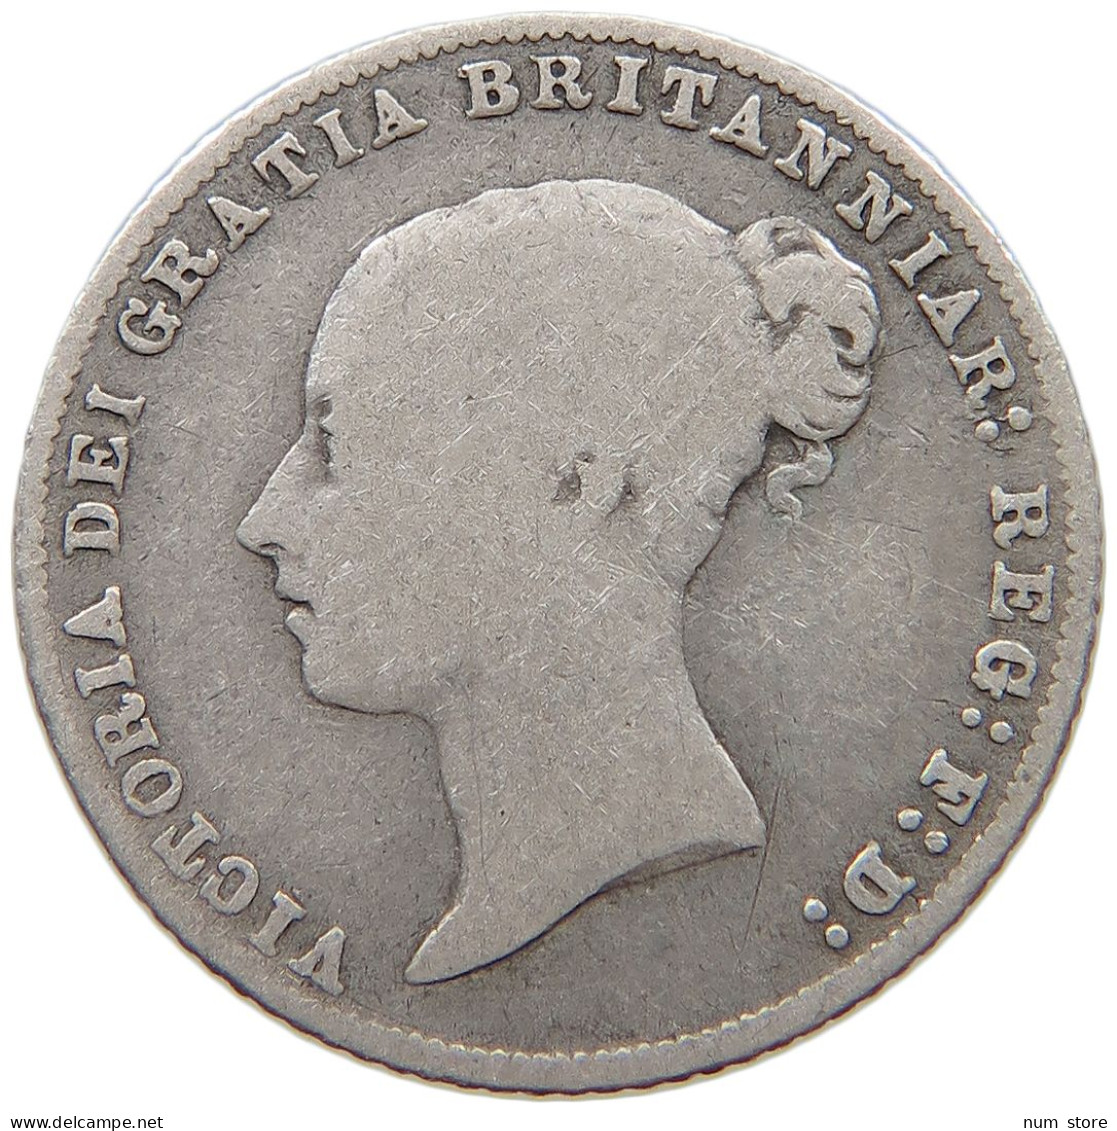 GREAT BRITAIN SIXPENCE 1866 Victoria 1837-1901 MINTING ERROR 1866 #c058 0181 - H. 6 Pence